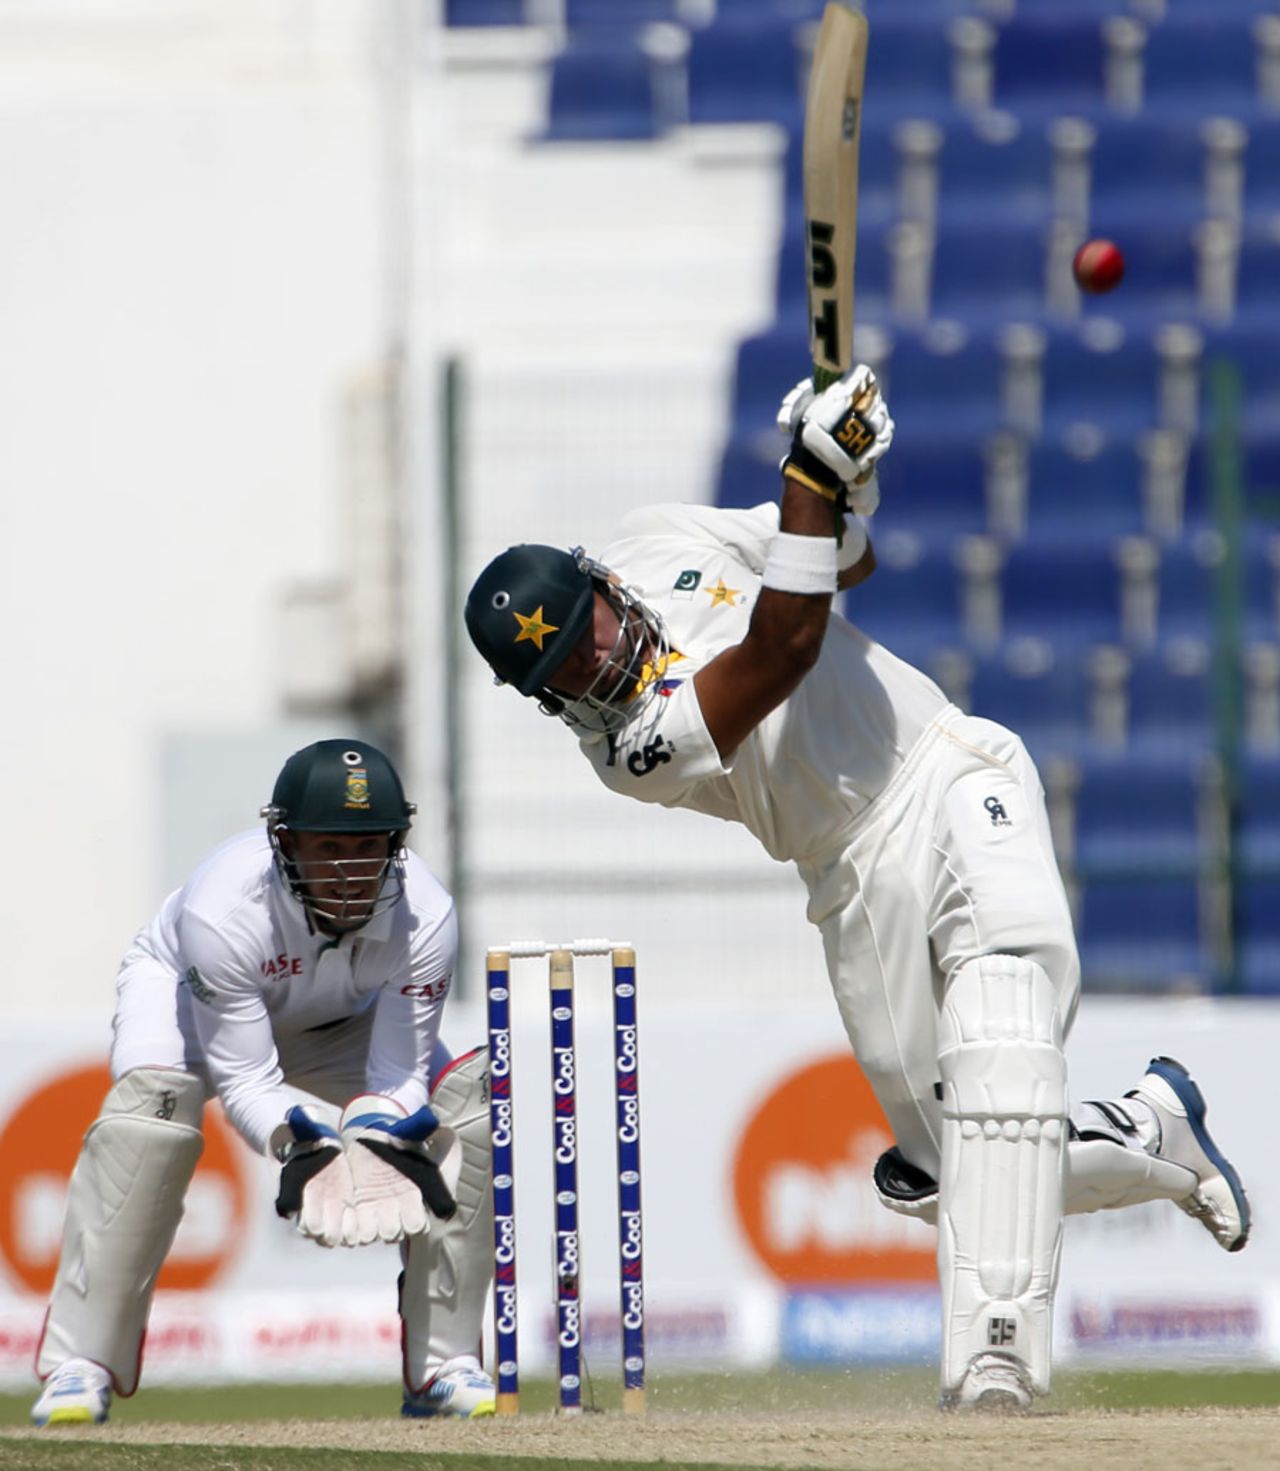 Khurram Manzoor lofts over the infield, Pakistan v South Africa, 1st Test, Abu Dhabi, 2nd day, October 15, 2013